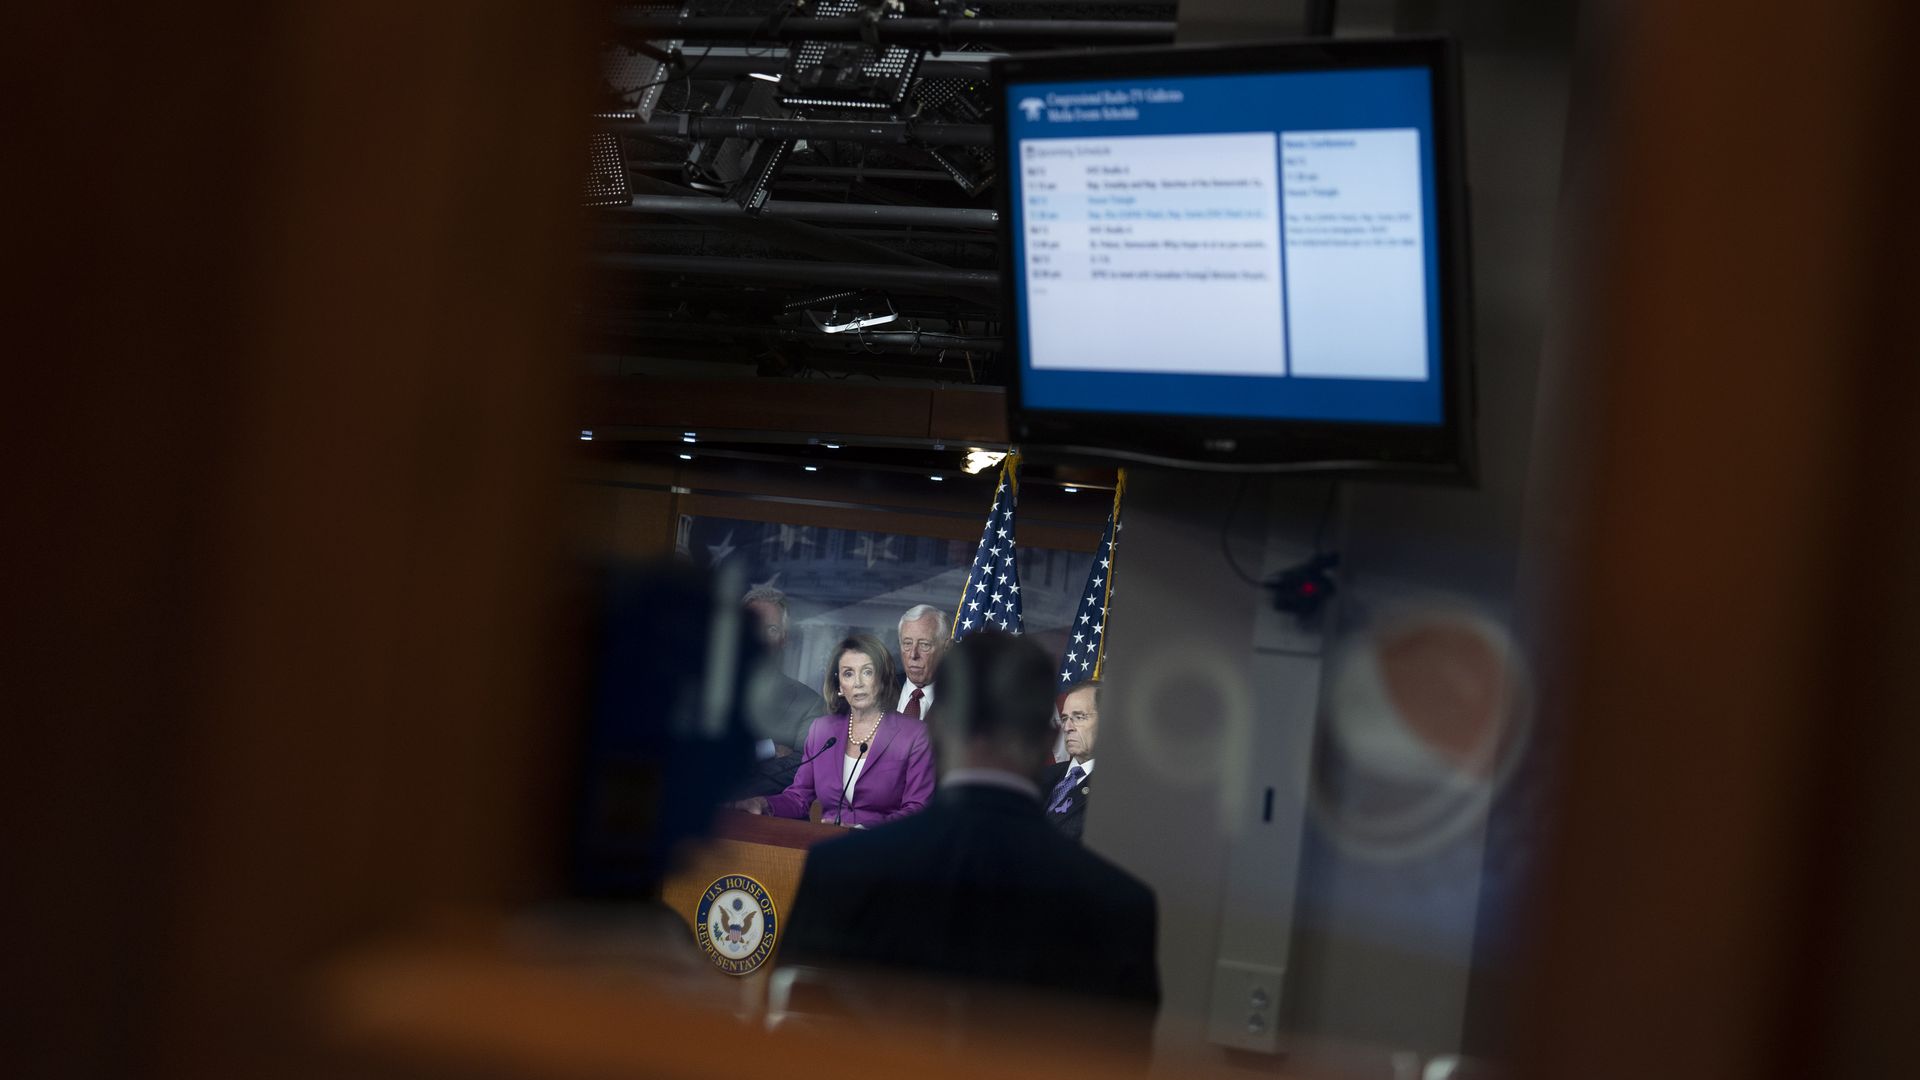 In this image, Democratic leaders stand on stage in the background of a blurred camera shot. They are standing underneath a presentation screen.